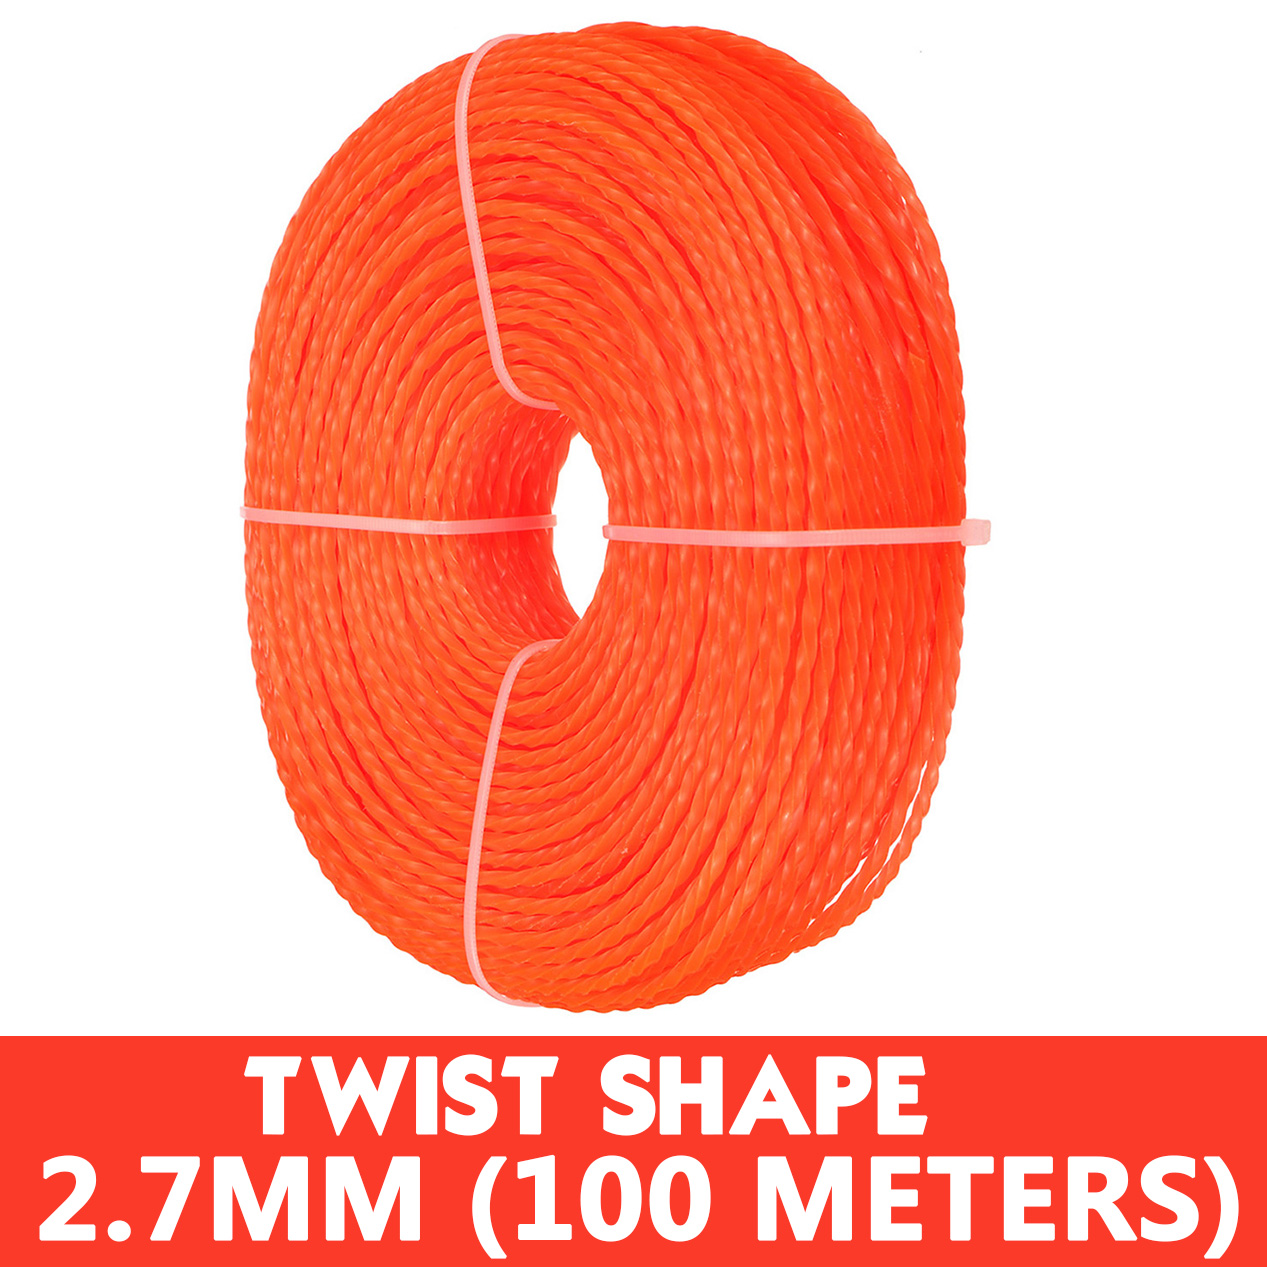 242730-mm-Commercial-Spiral-Twist-Trimmer-Line-Whipper-Snipper-Cord-1790010-3